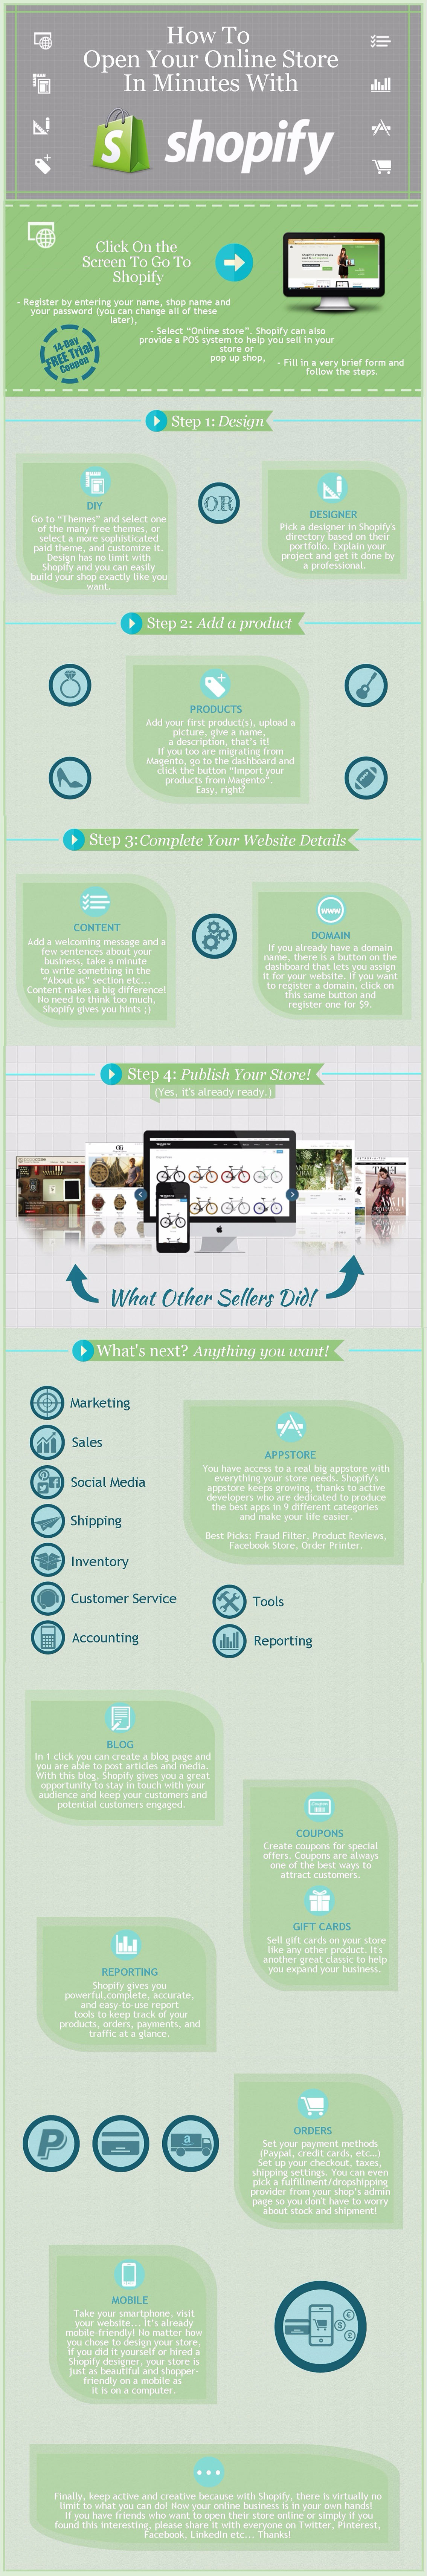 How to Use Shopify to Open Online Store in Minutes Infographic